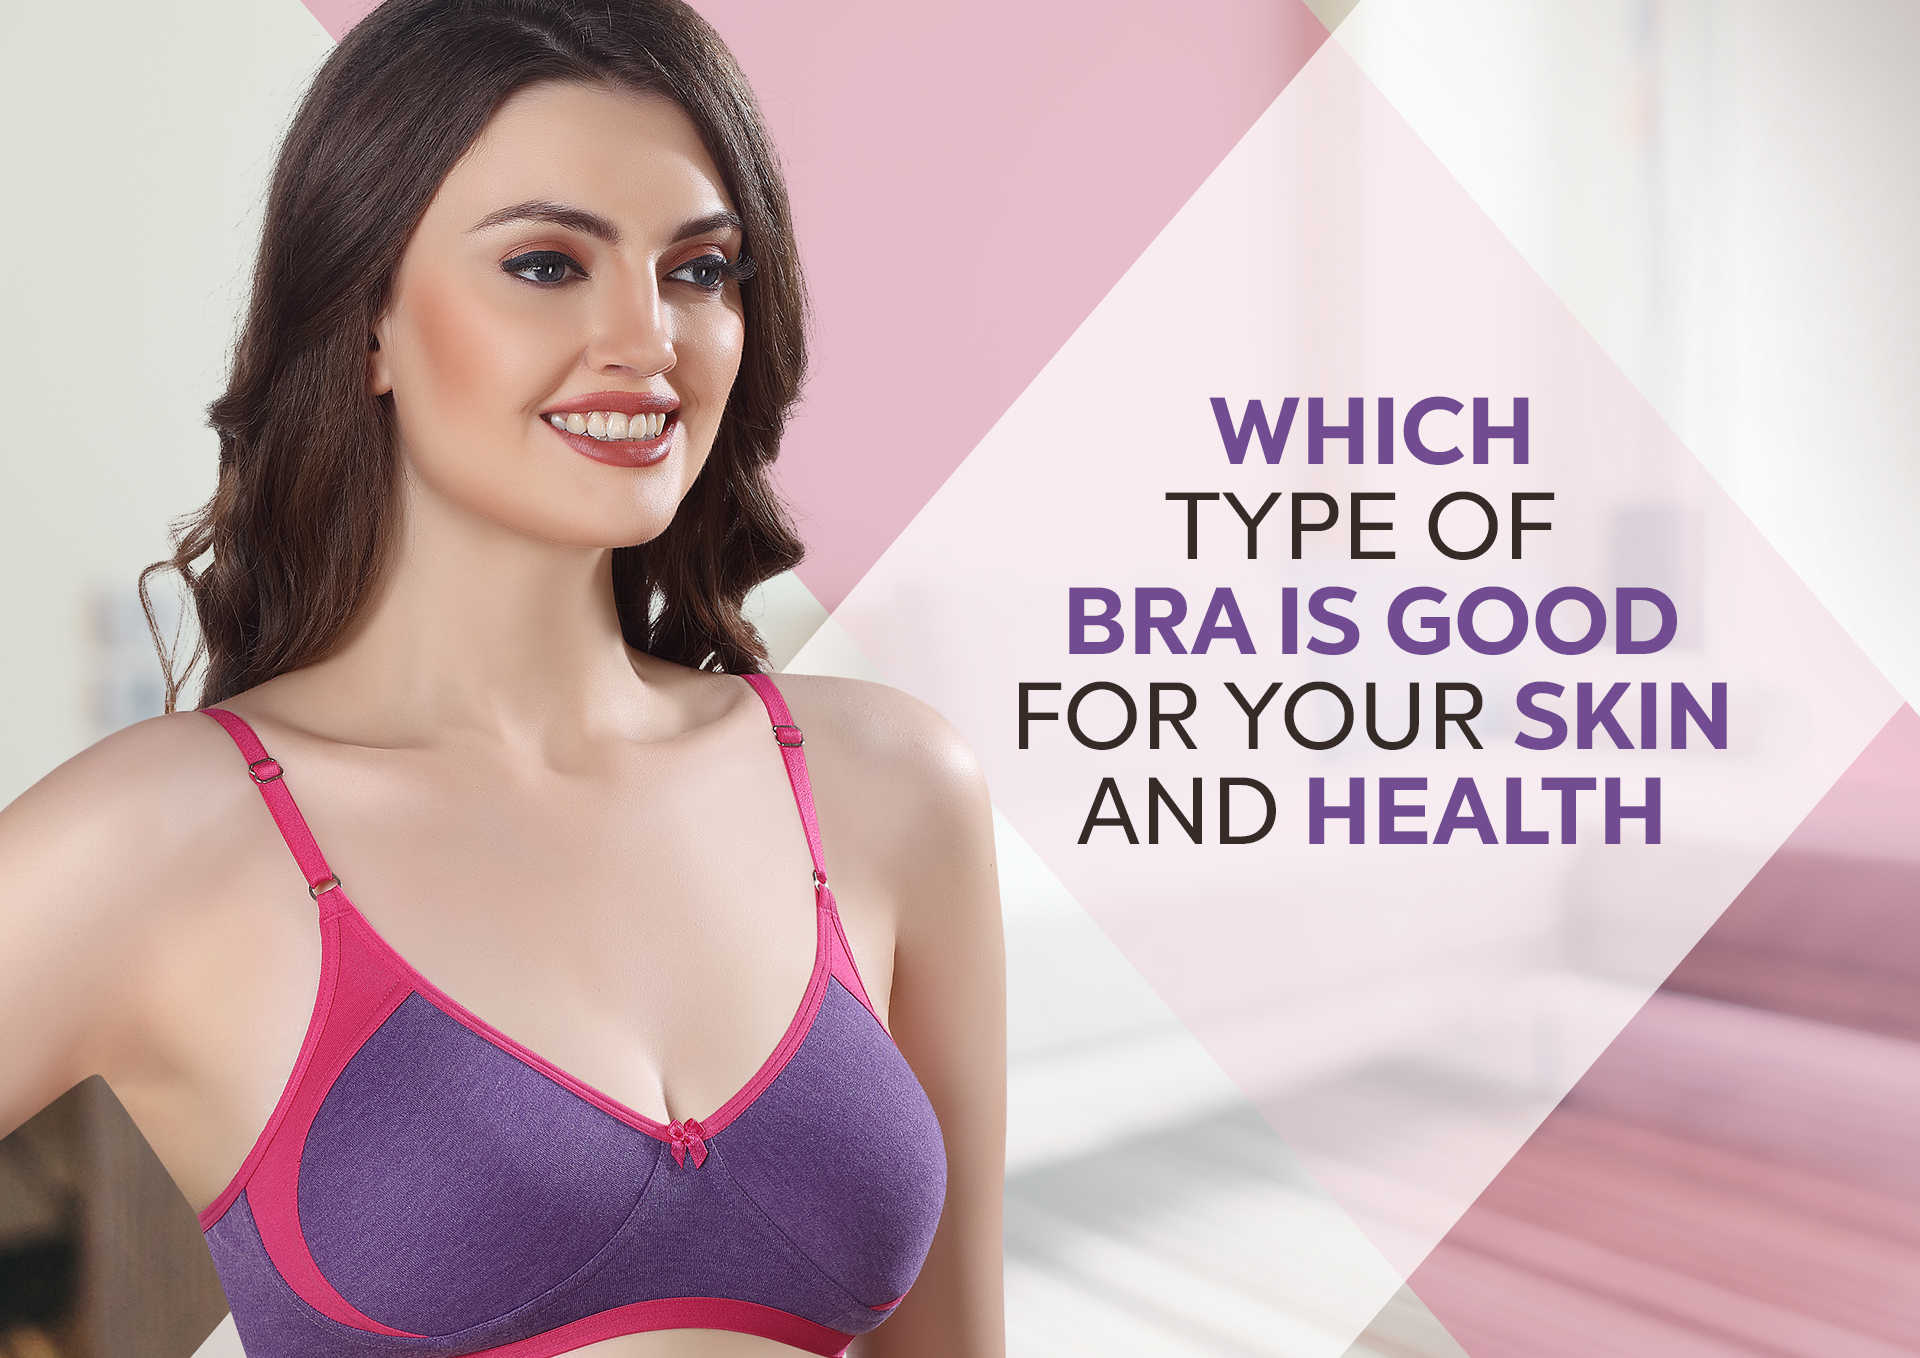 Which Types of Bras Are Good, and Which Ones Can Be Bad for Your Health